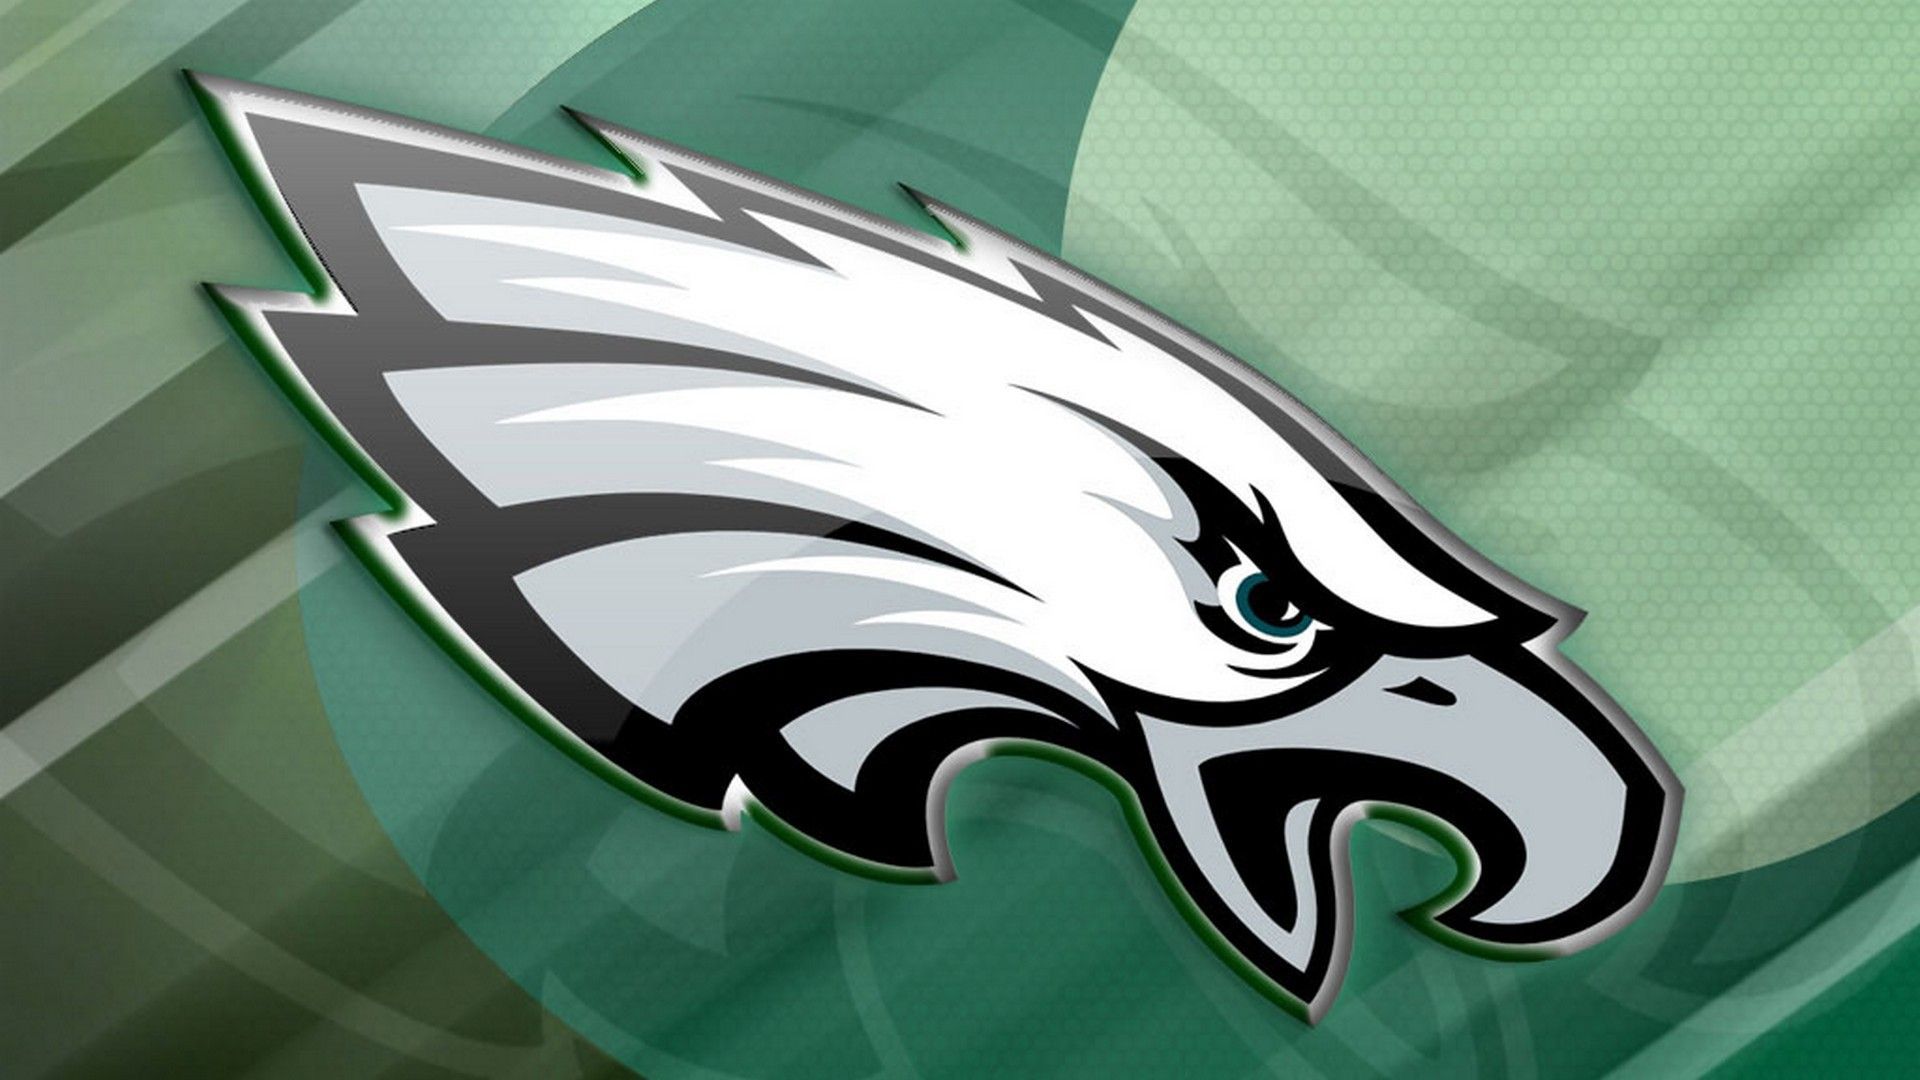 The Eagles For PC Wallpaper NFL Football Wallpaper. Philadelphia eagles wallpaper, Philadelphia eagles logo, Philadelphia eagles football